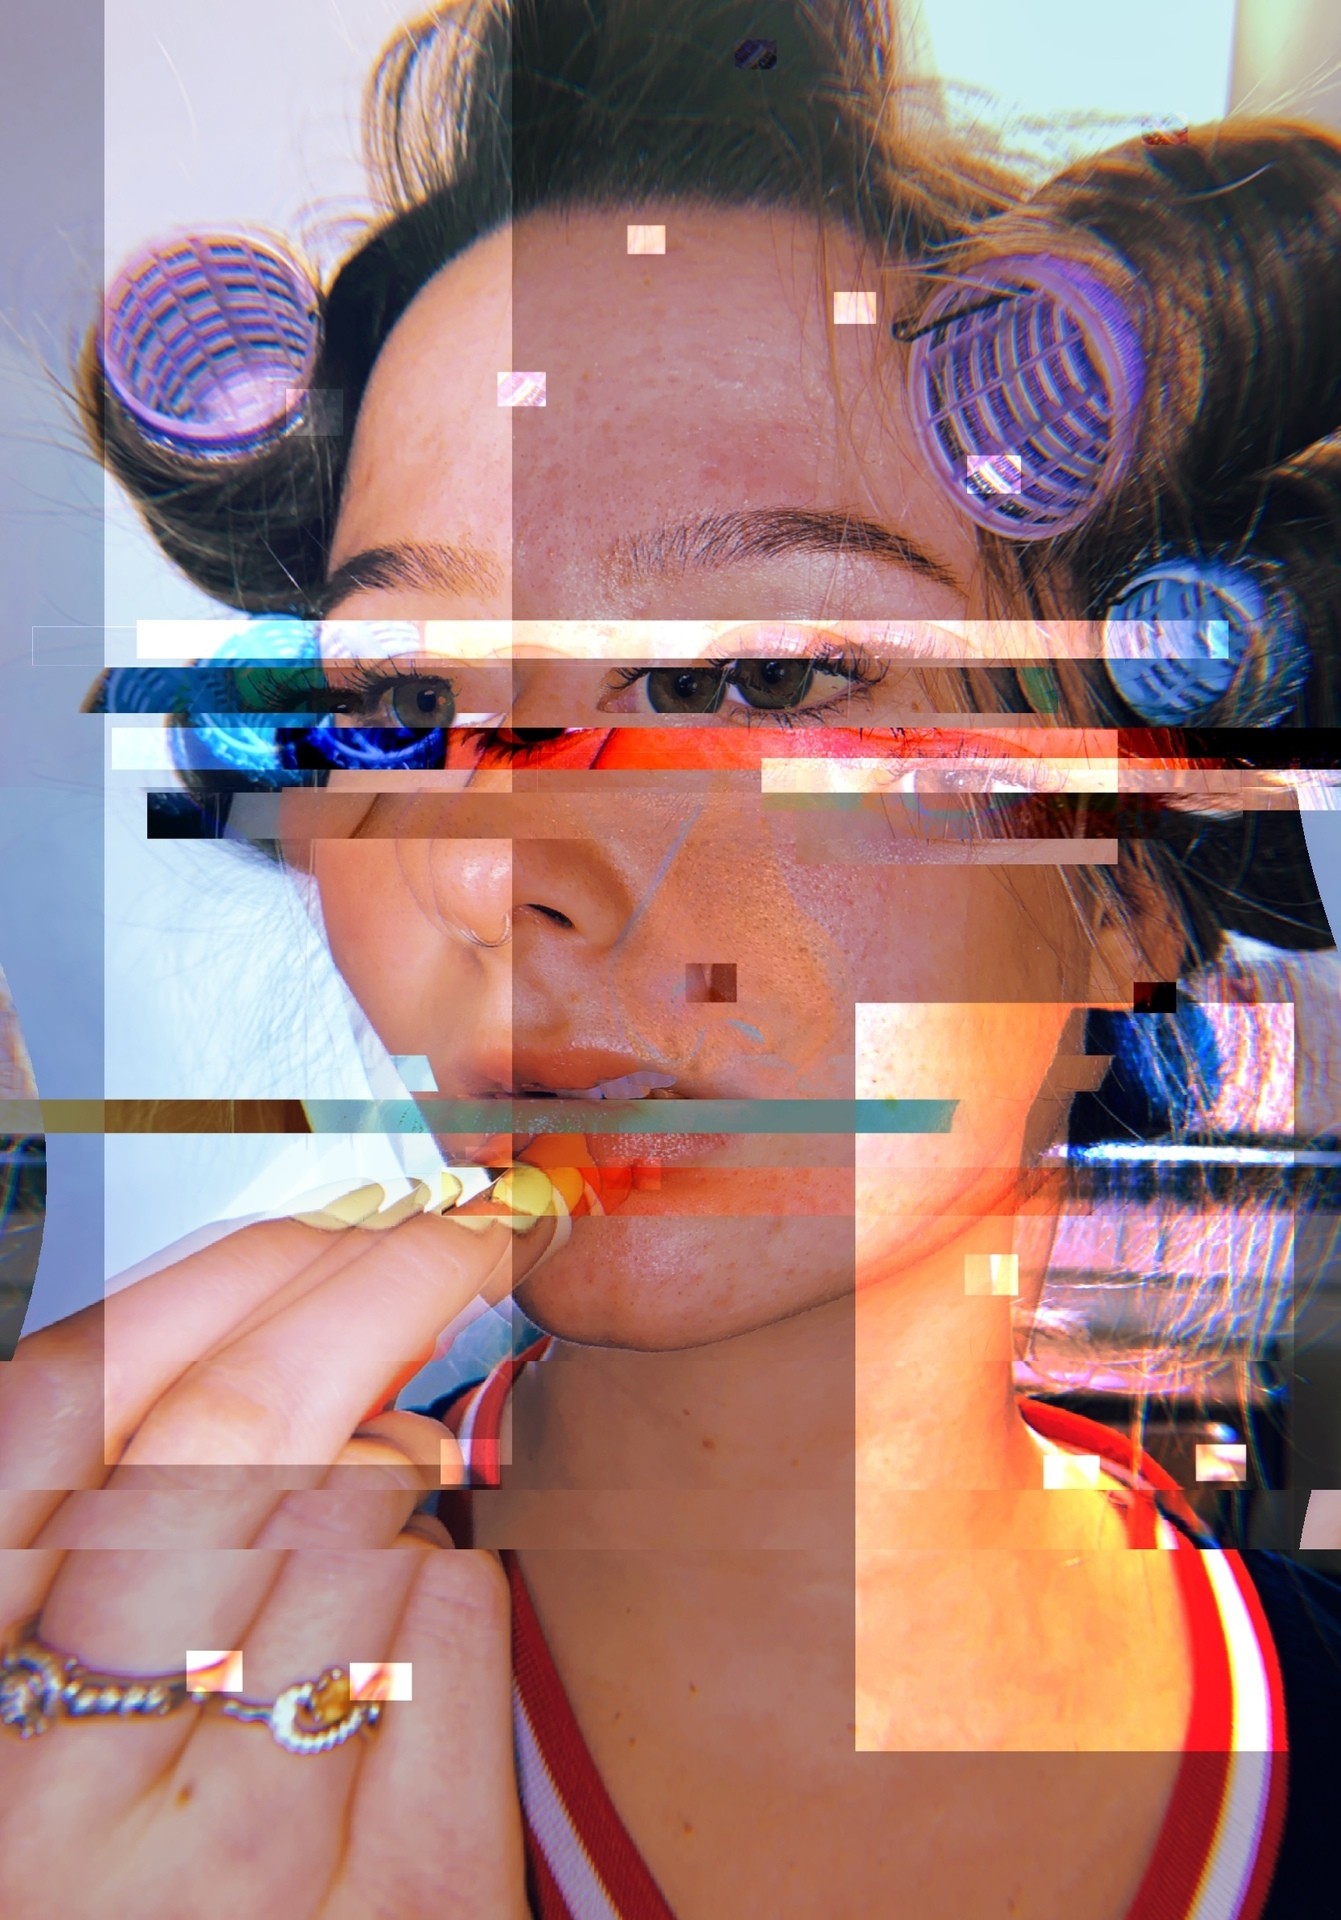 Digital art of a glitching person applying makeup